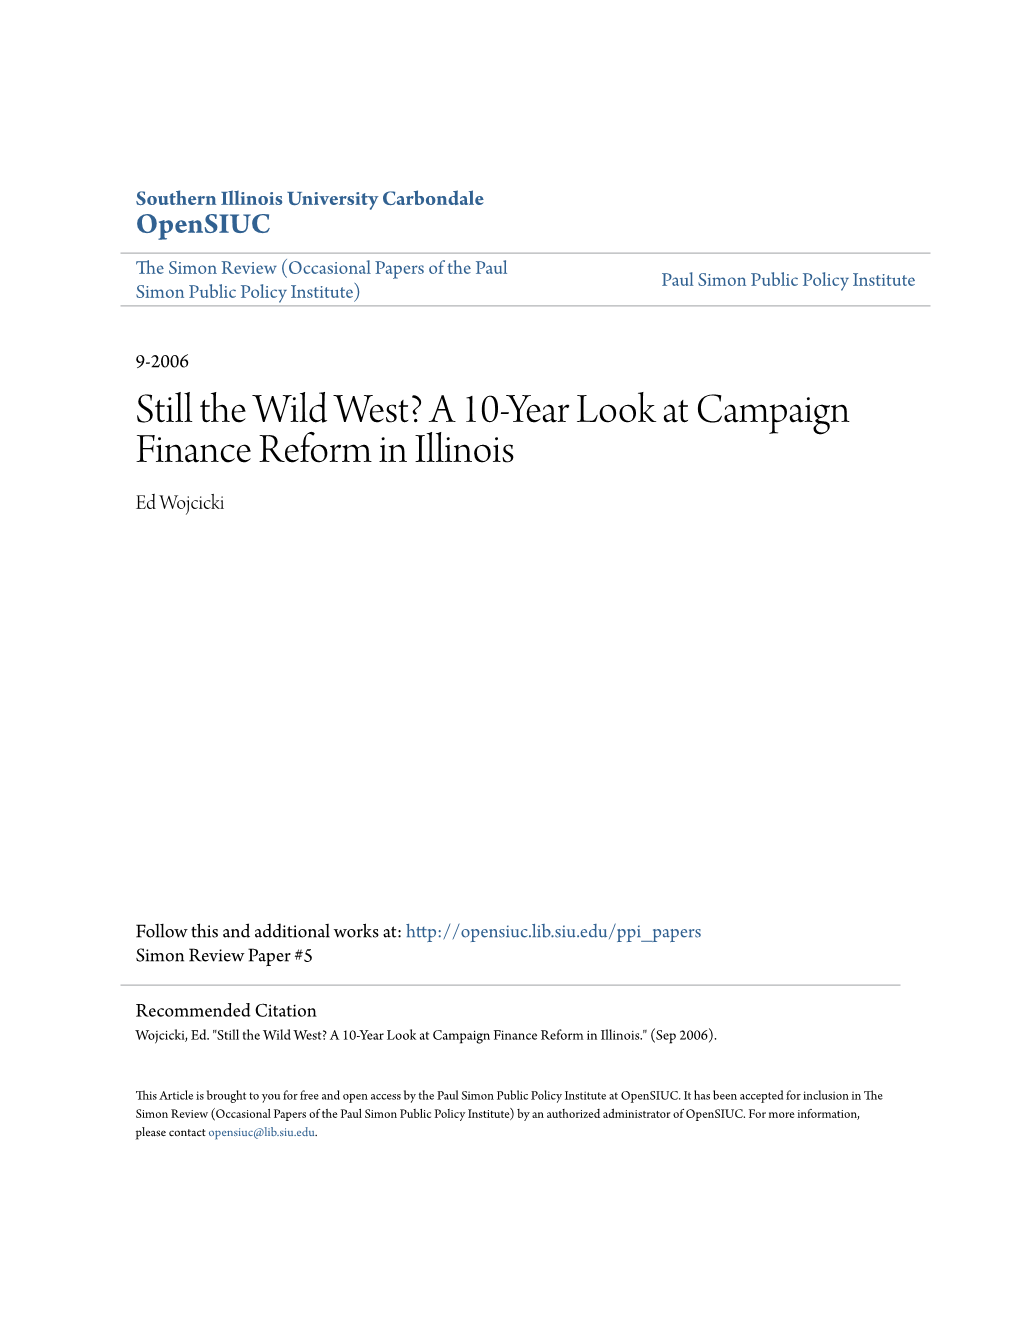 A 10-Year Look at Campaign Finance Reform in Illinois Ed Wojcicki